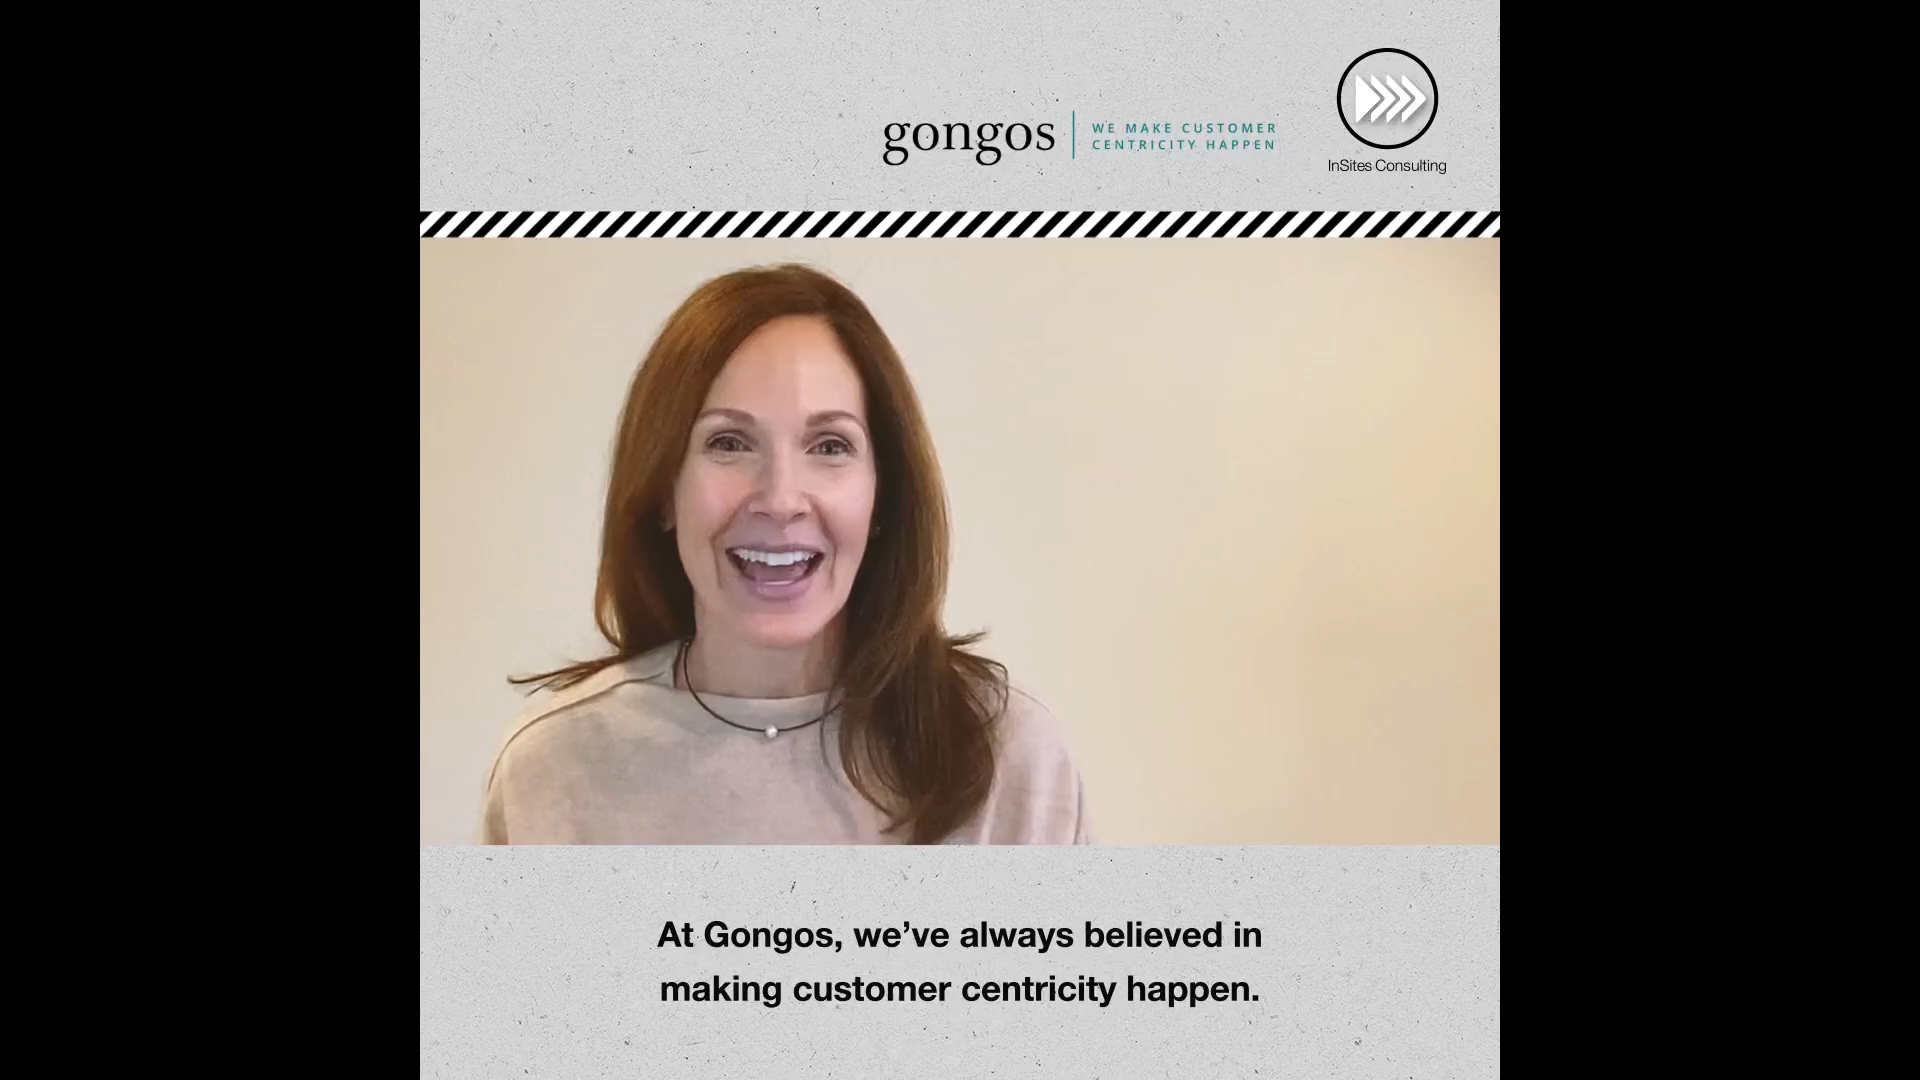 Camille Nicita, former CEO of Gongos, Inc., on the announcement.